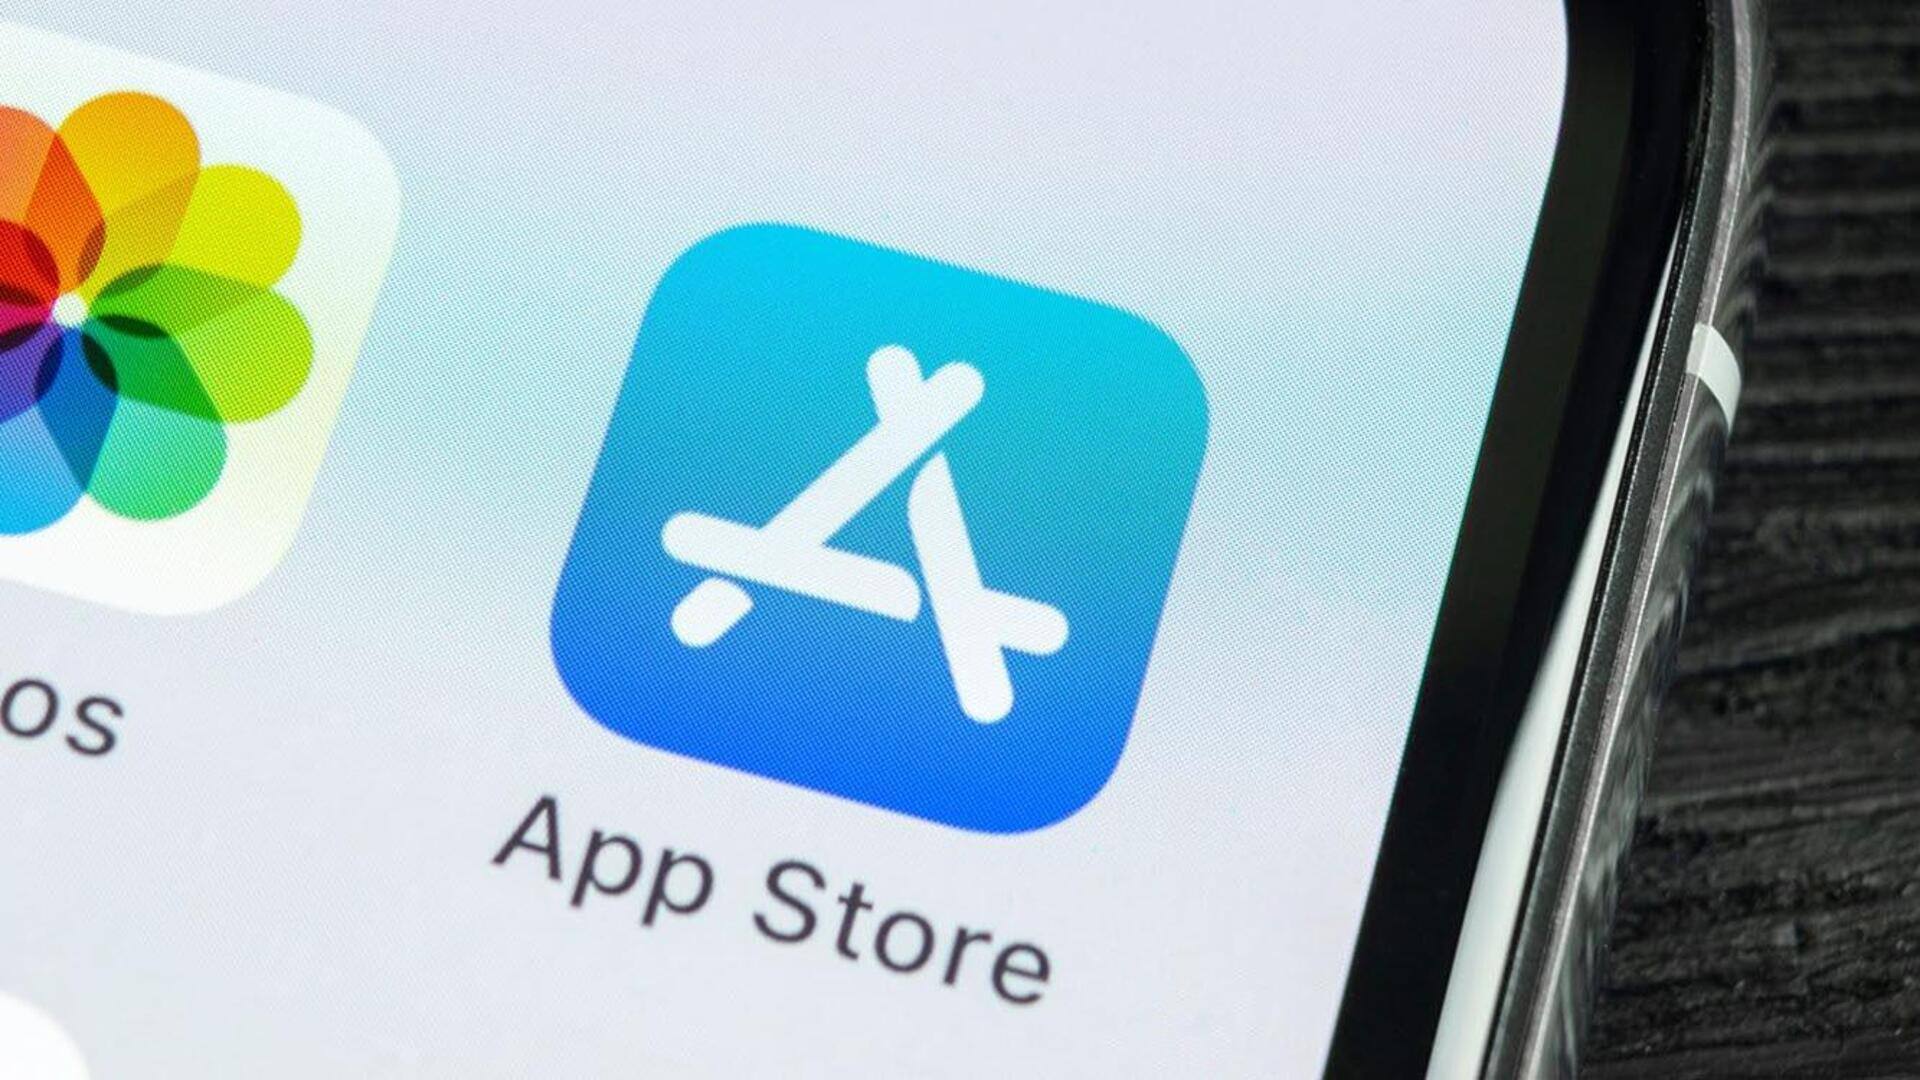 Apple complies with China's stricter app store rules